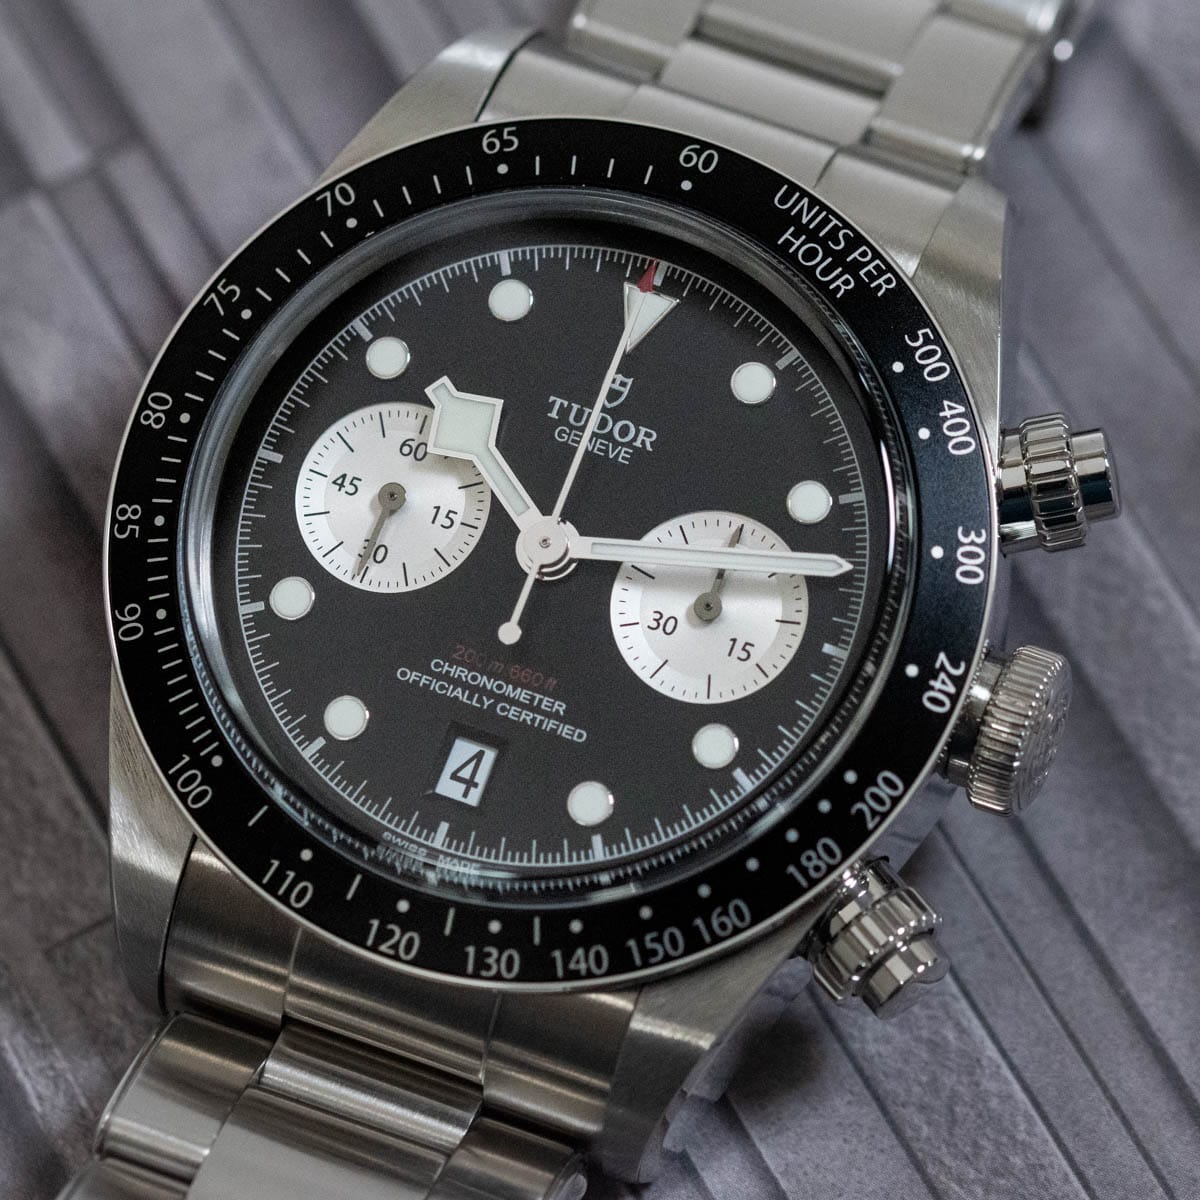 Stylied photo of  of Black Bay Chronograph